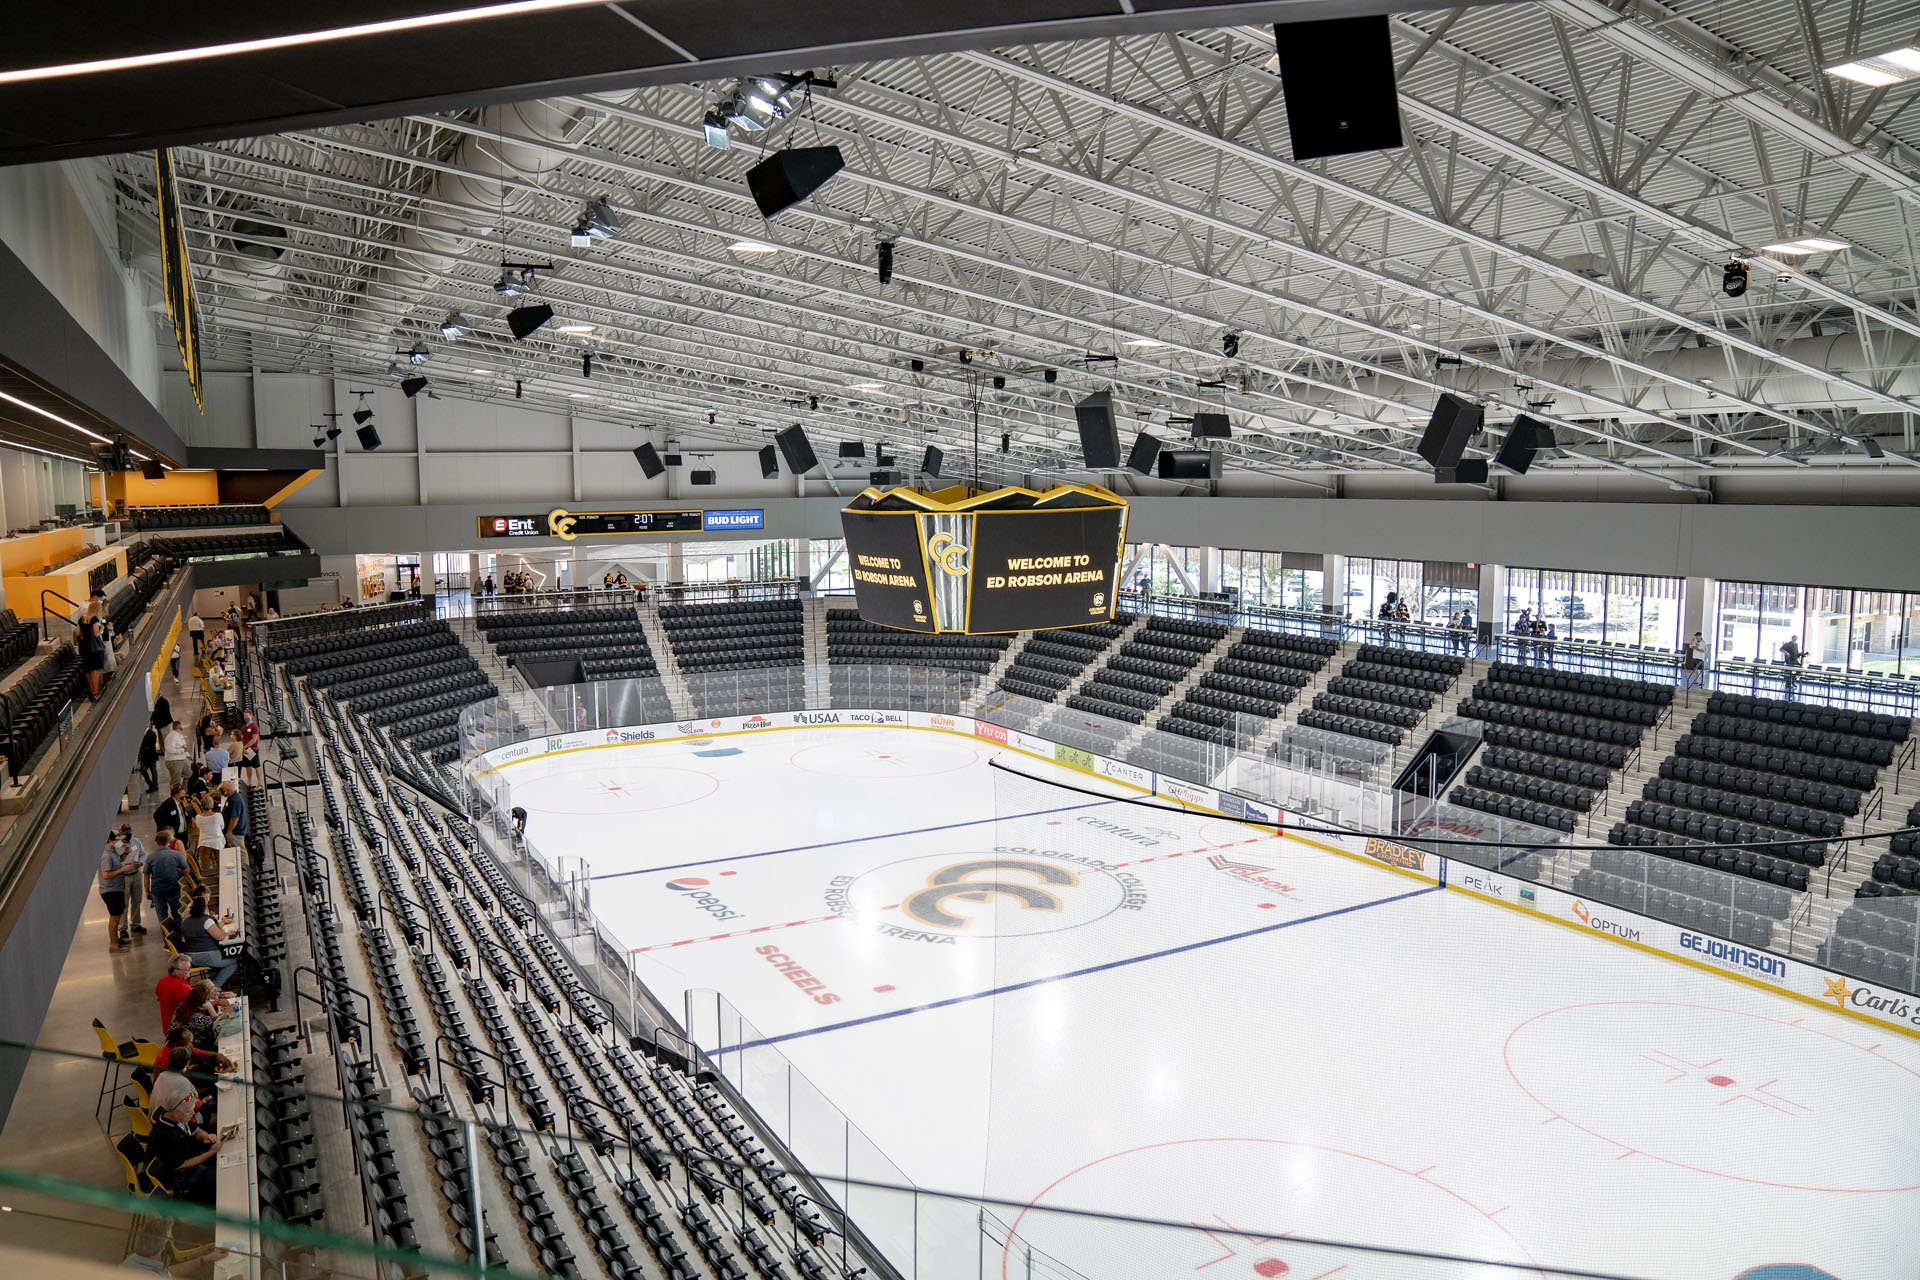 CC celebrated the opening of the new Ed Robson Arena with a ribbon-cutting and tours of the space Saturday, Sept. 18. The arena is the new practice and competition space for Tiger Hockey and will host campus and community events along with classrooms and meeting spaces. Photo by Gray Warrior.